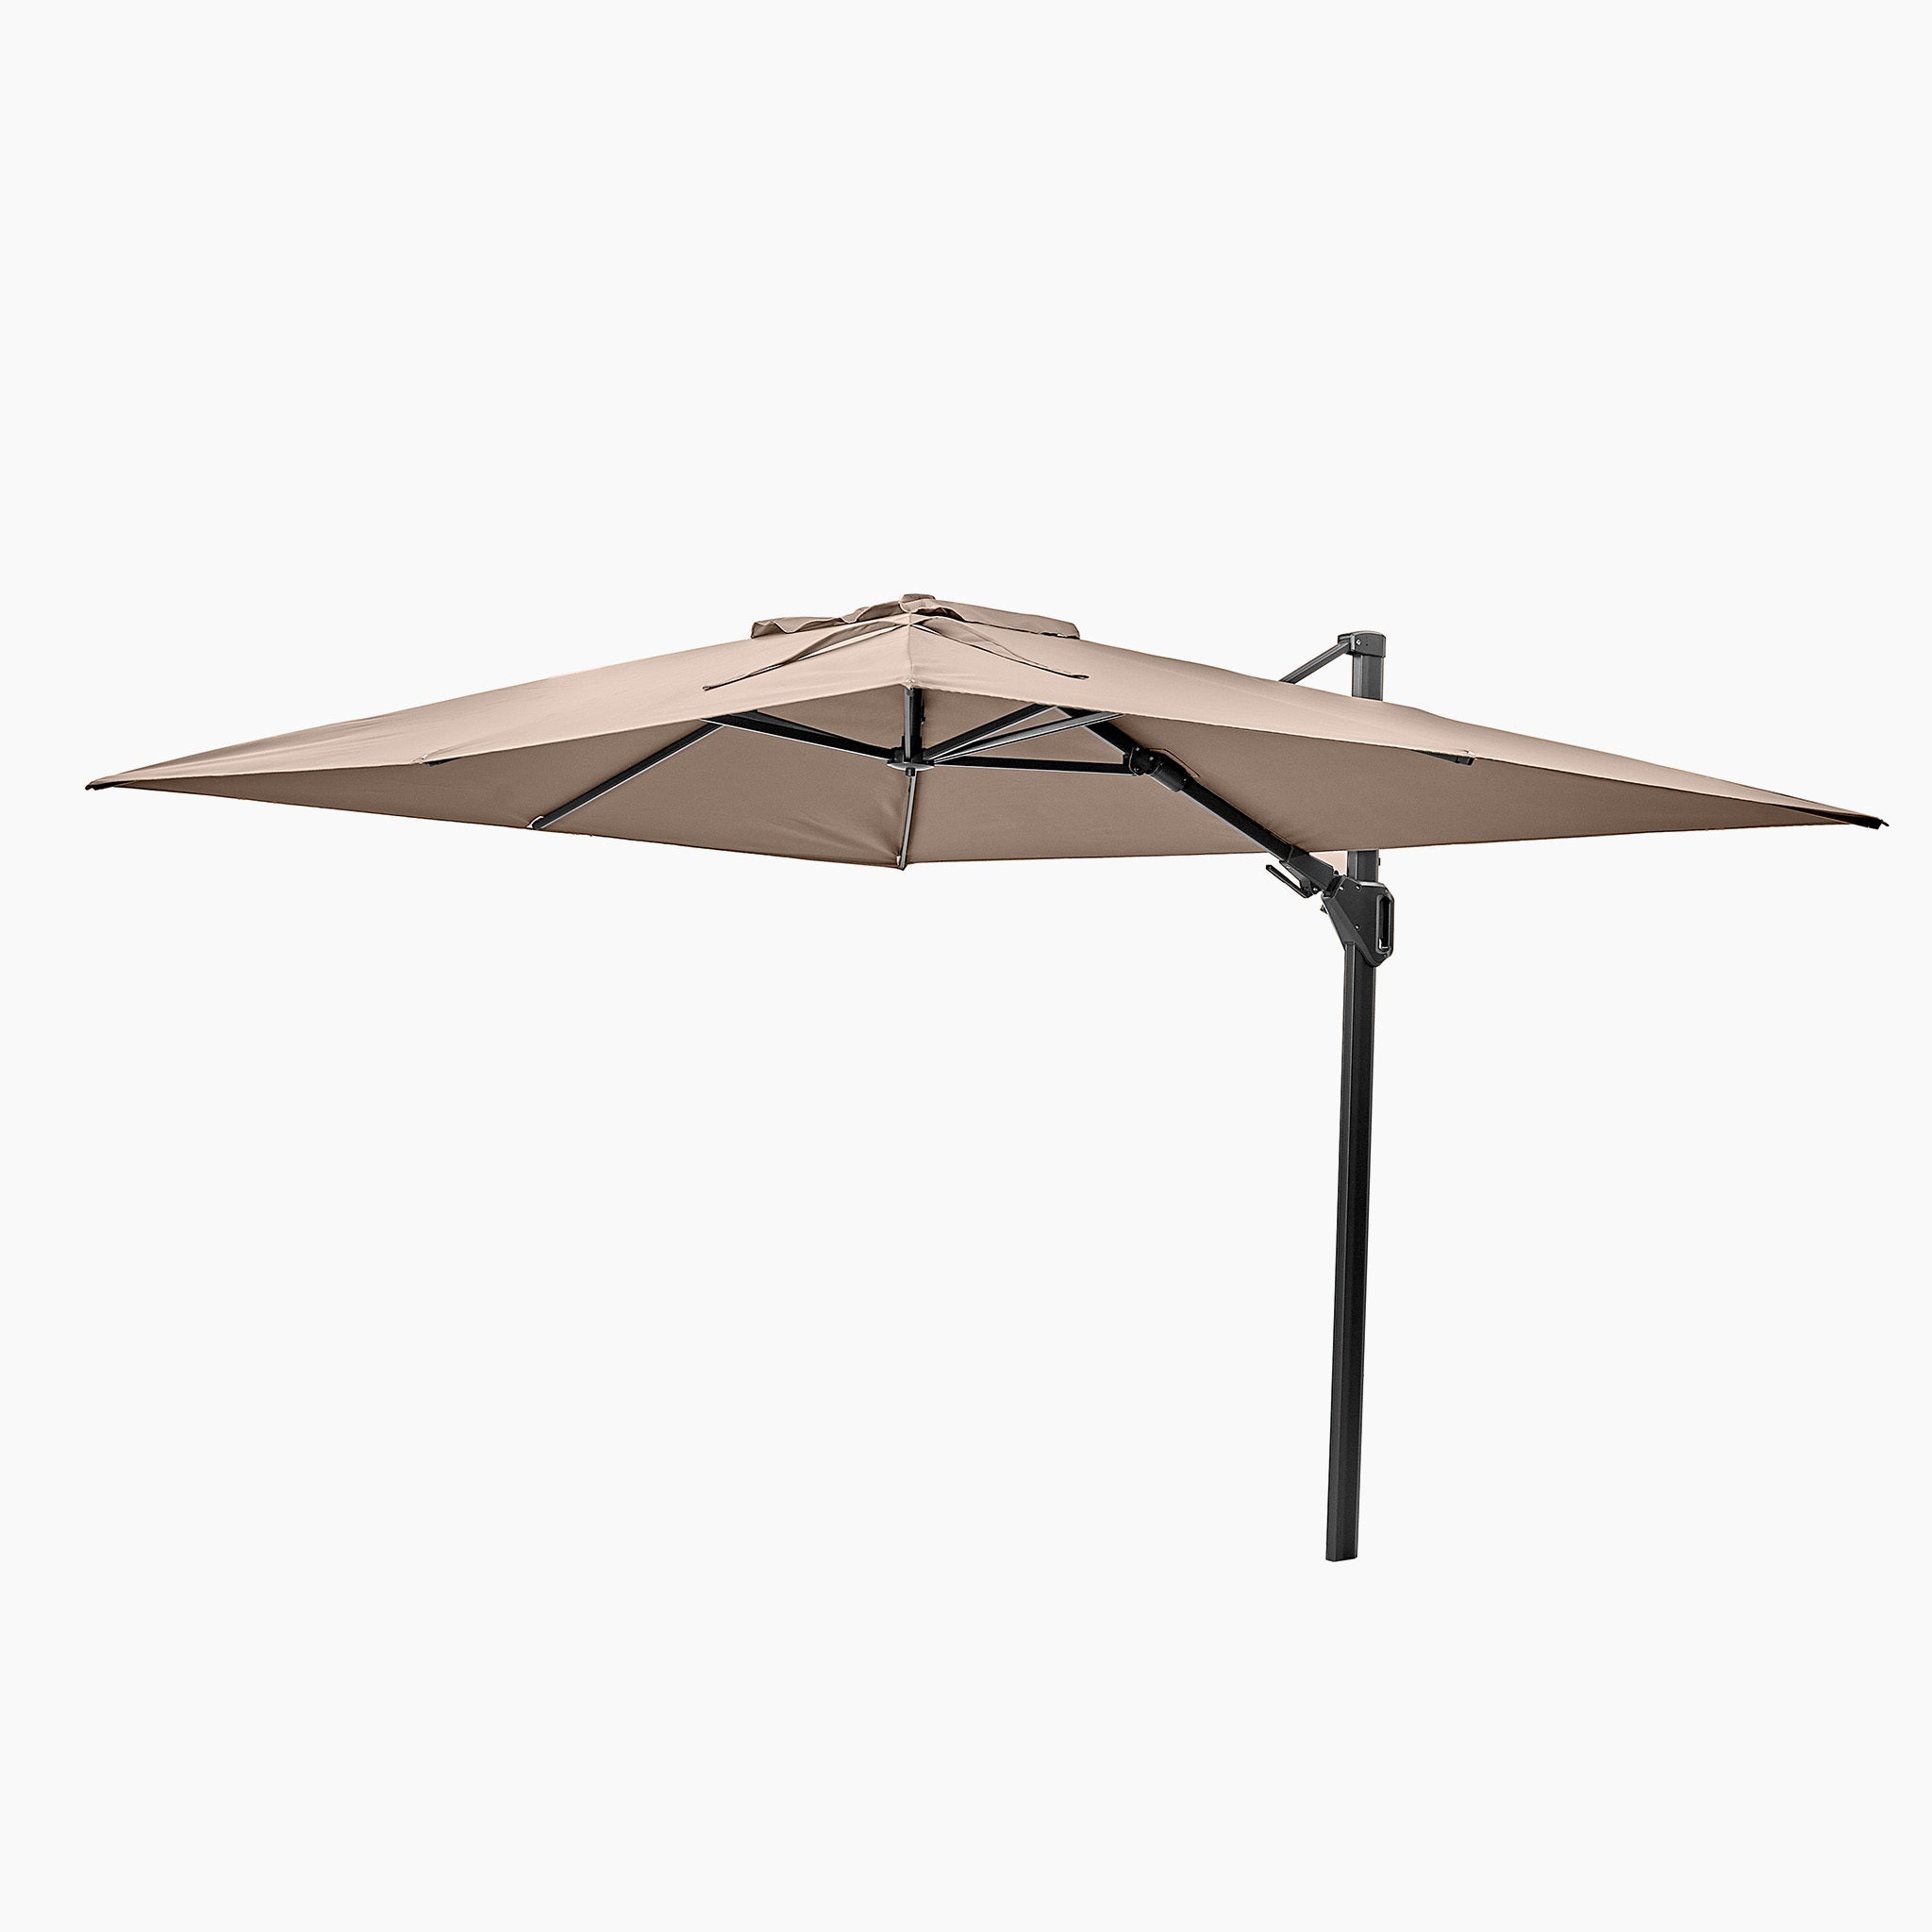 Challenger T2 3.5m x 2.6m Rectangular Cantilever Parasol in Taupe